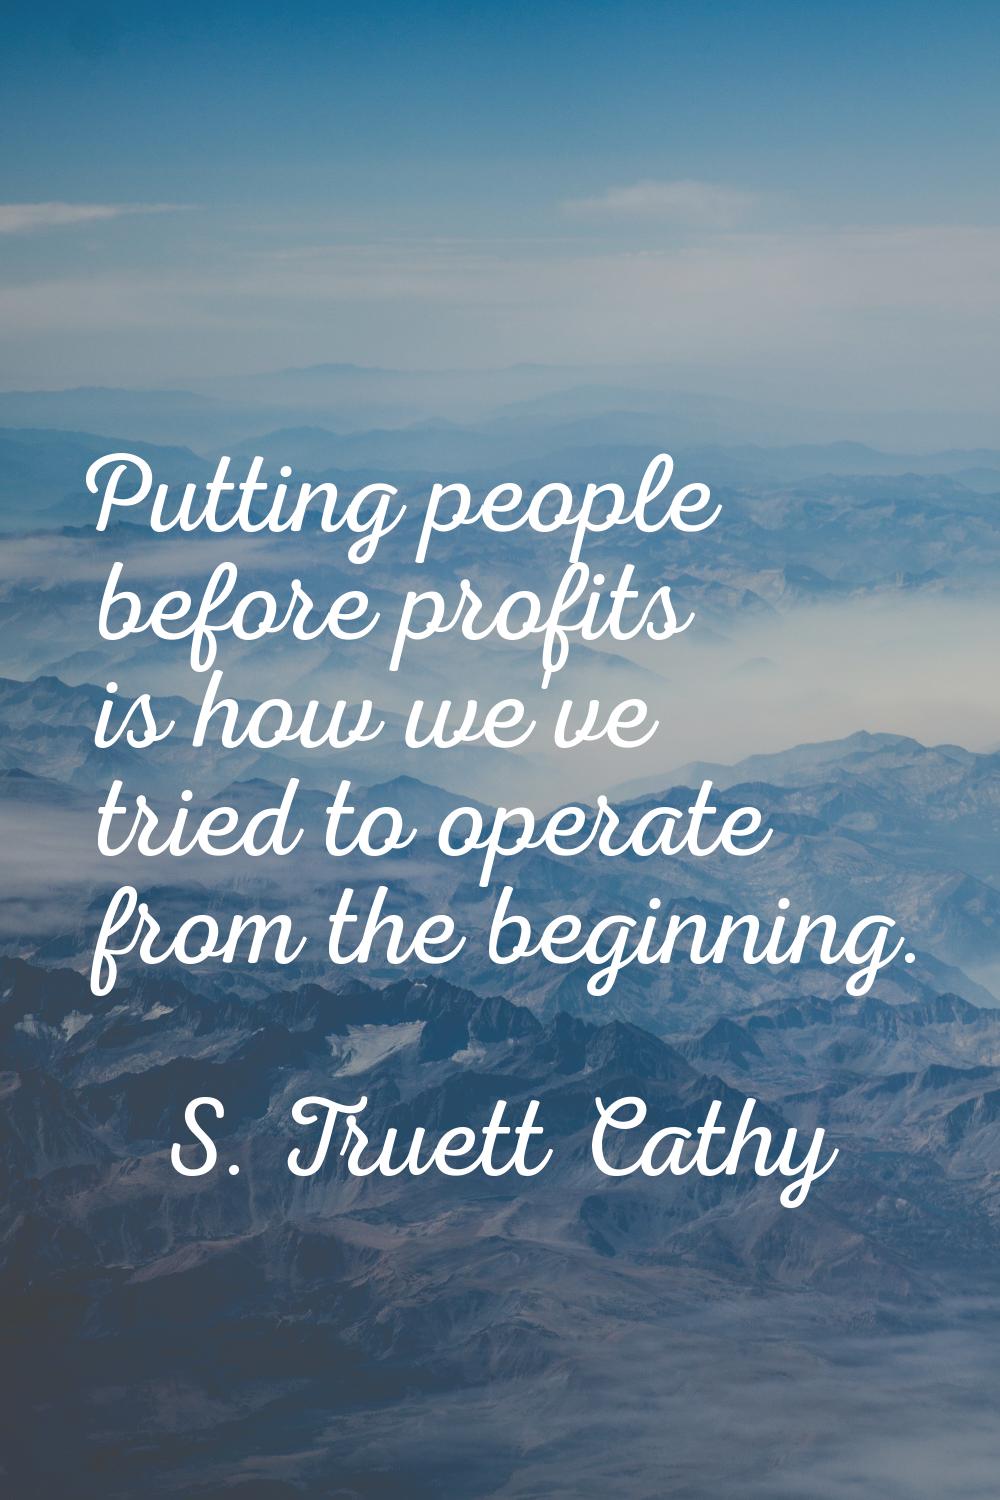 Putting people before profits is how we've tried to operate from the beginning.